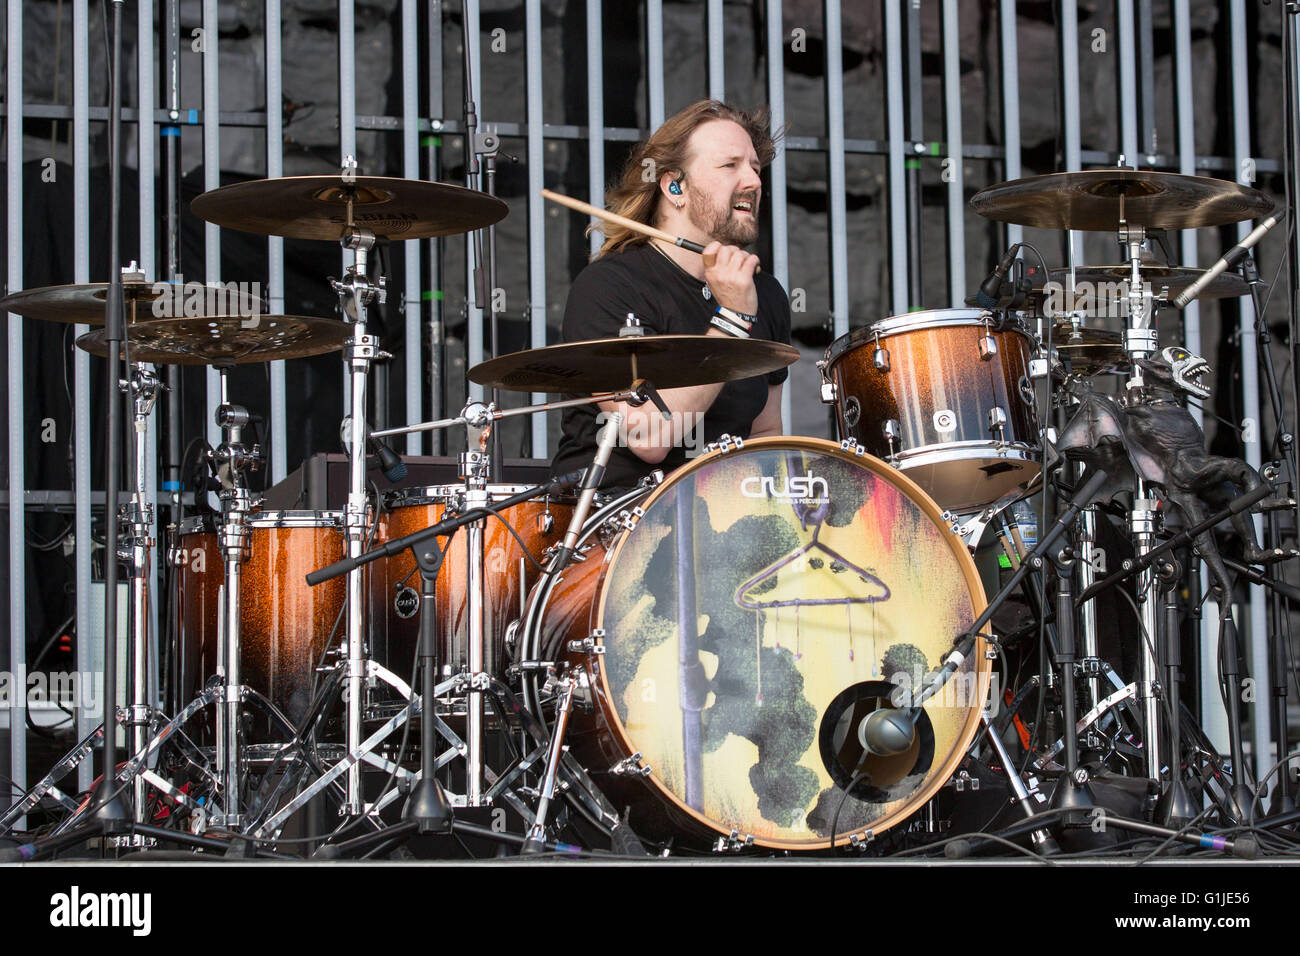 Somerset, Wisconsin, USA. 15th May, 2016. Drummer JOHN HUMPHREY of Seether performs live at Somerset Amphitheater during the Northern Invasion Music Festival in Somerset, Wisconsin © Daniel DeSlover/ZUMA Wire/Alamy Live News Stock Photo